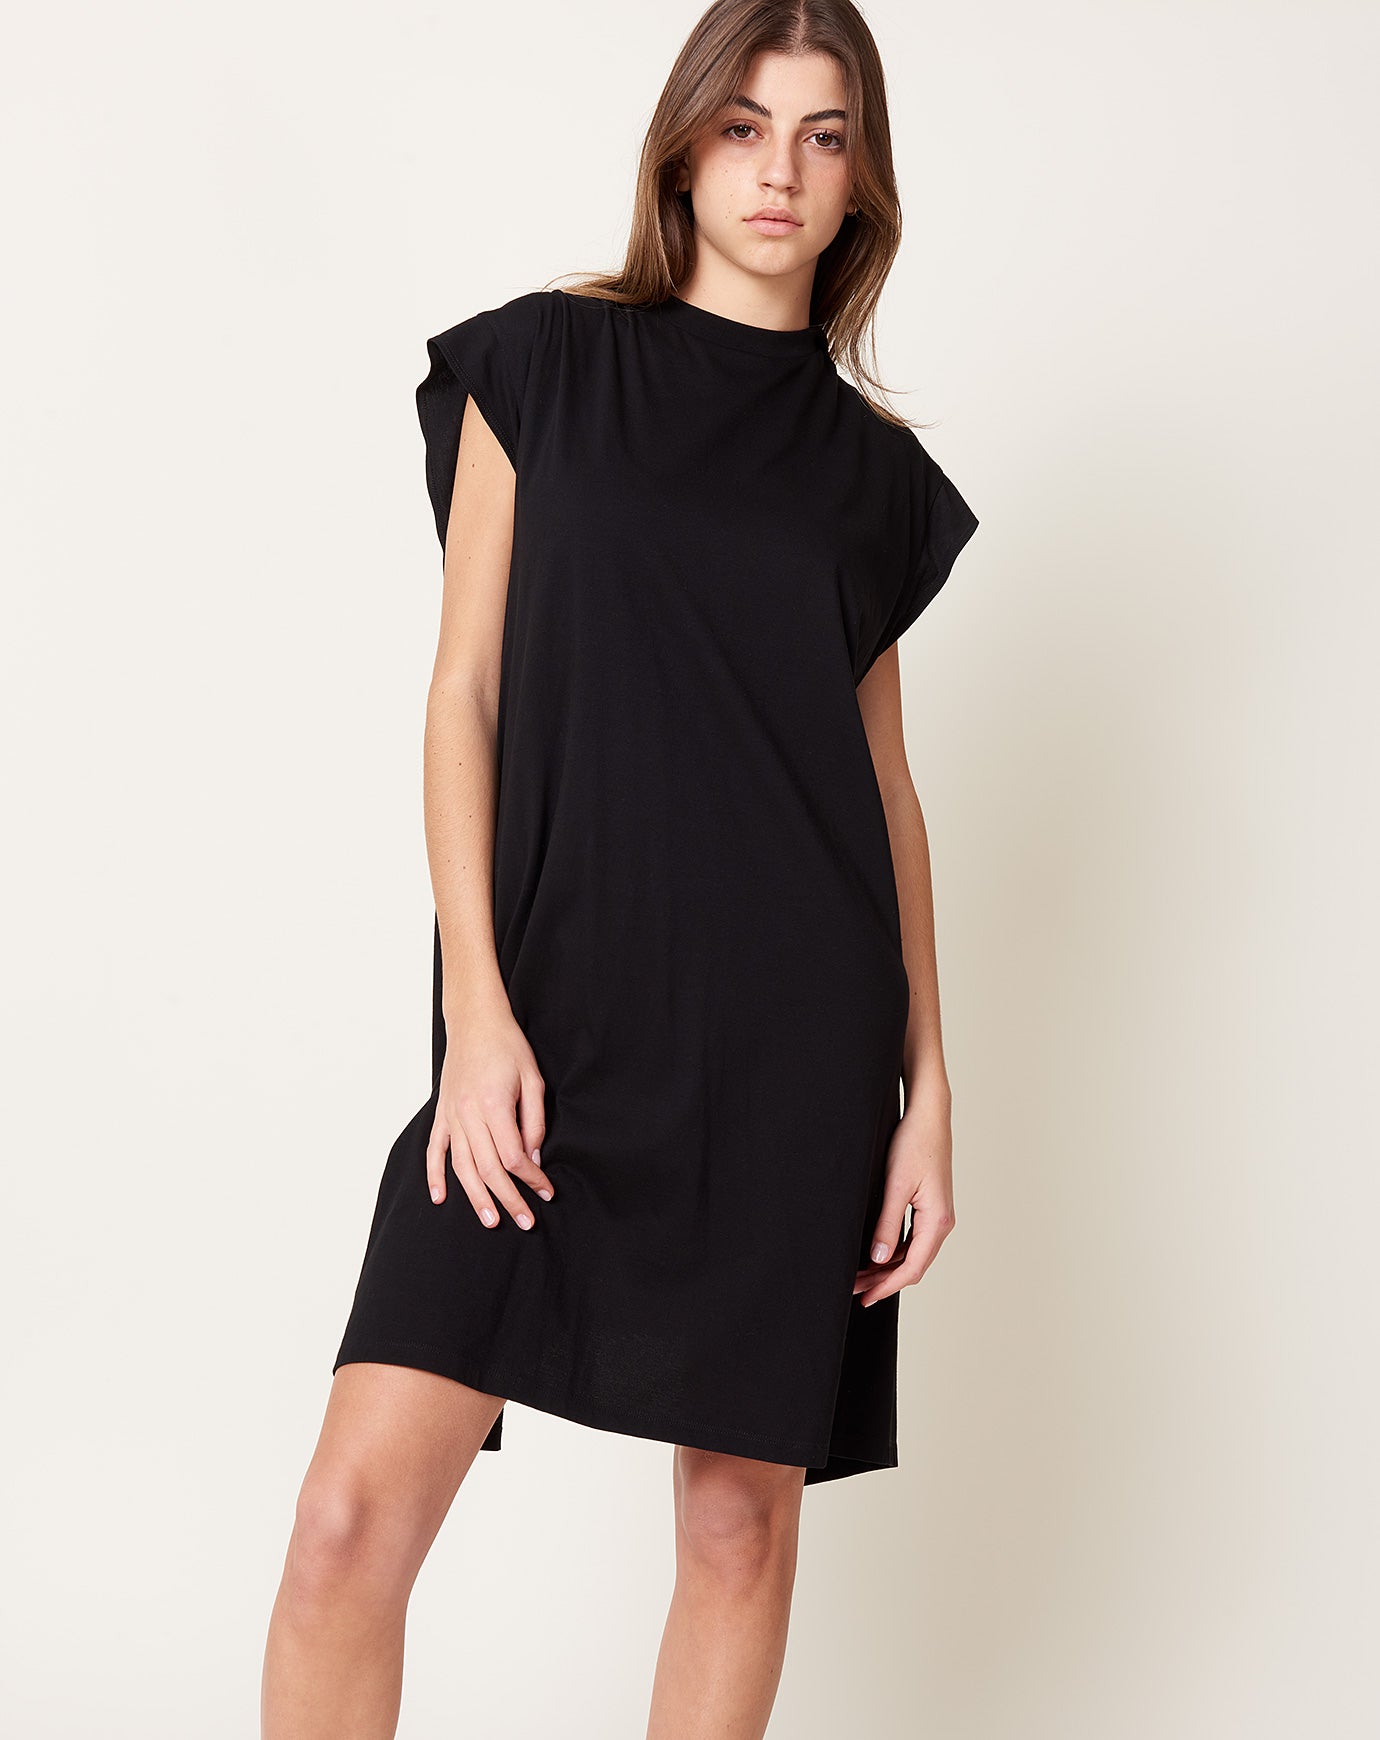 MM6 Two Way Dress in Black and White